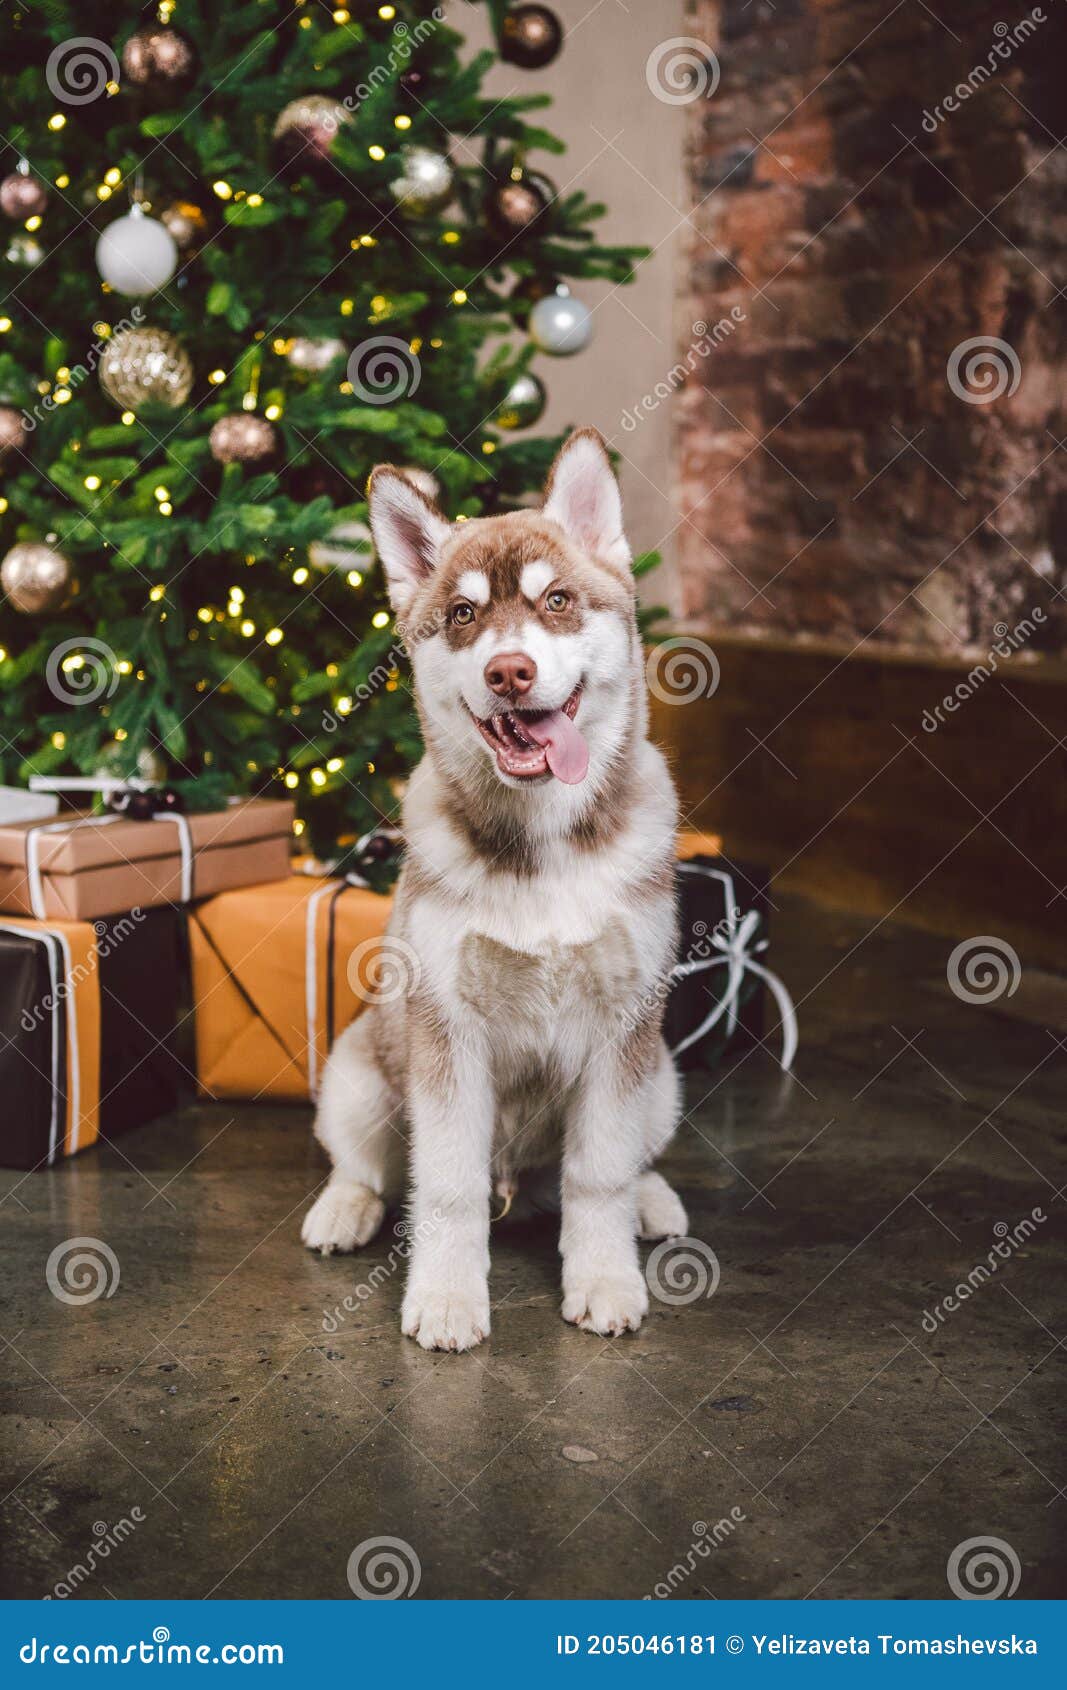 Dog Wolf Breed Husky White-brown Color Sits Near Christmas Tree ...